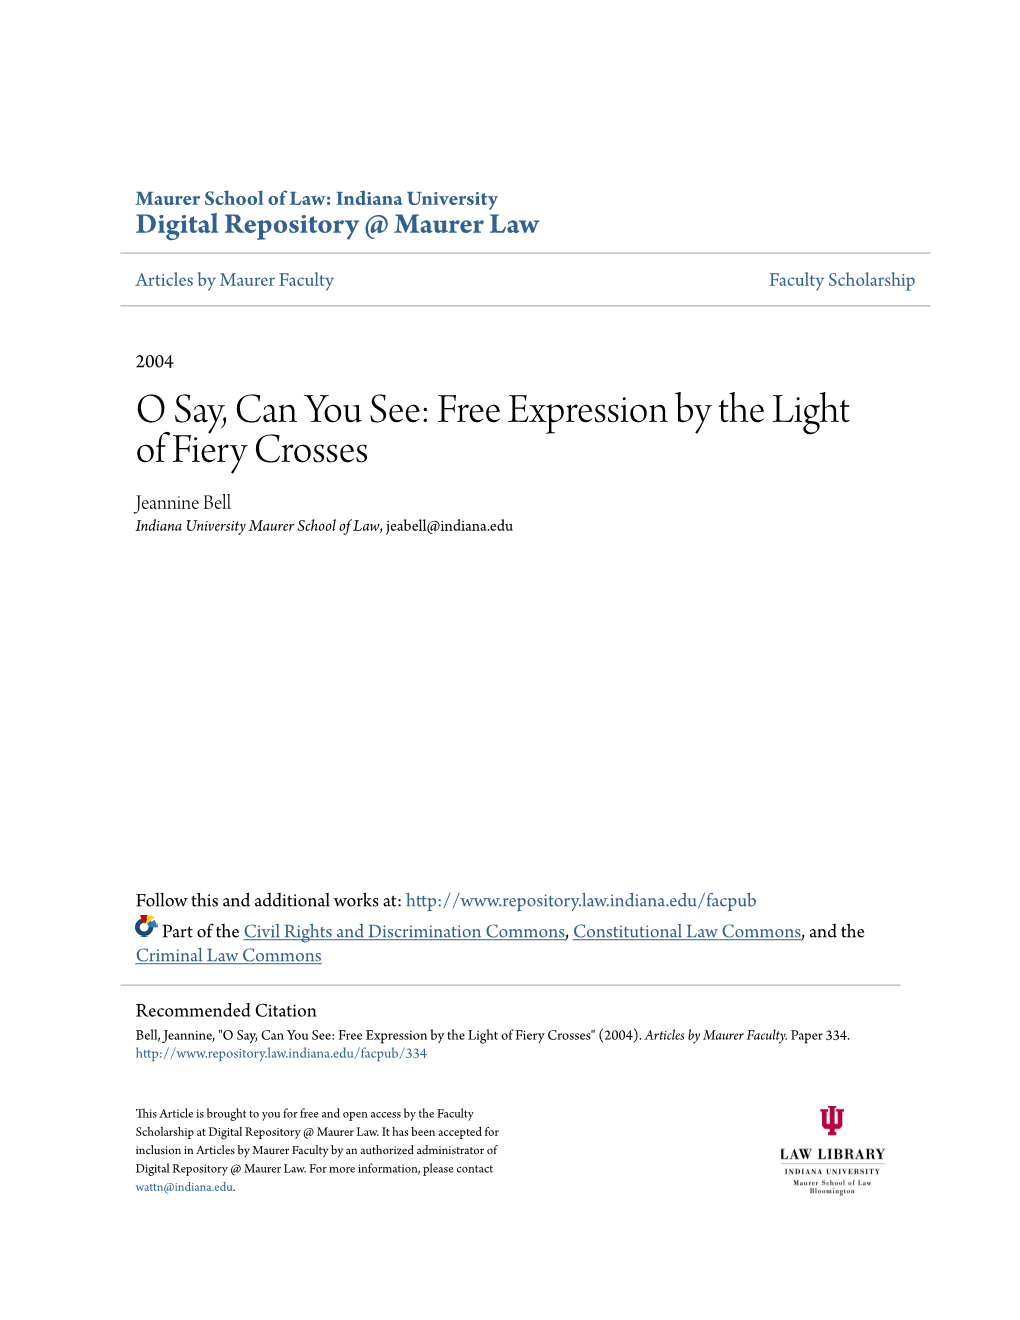 O Say, Can You See: Free Expression by the Light of Fiery Crosses Jeannine Bell Indiana University Maurer School of Law, Jeabell@Indiana.Edu